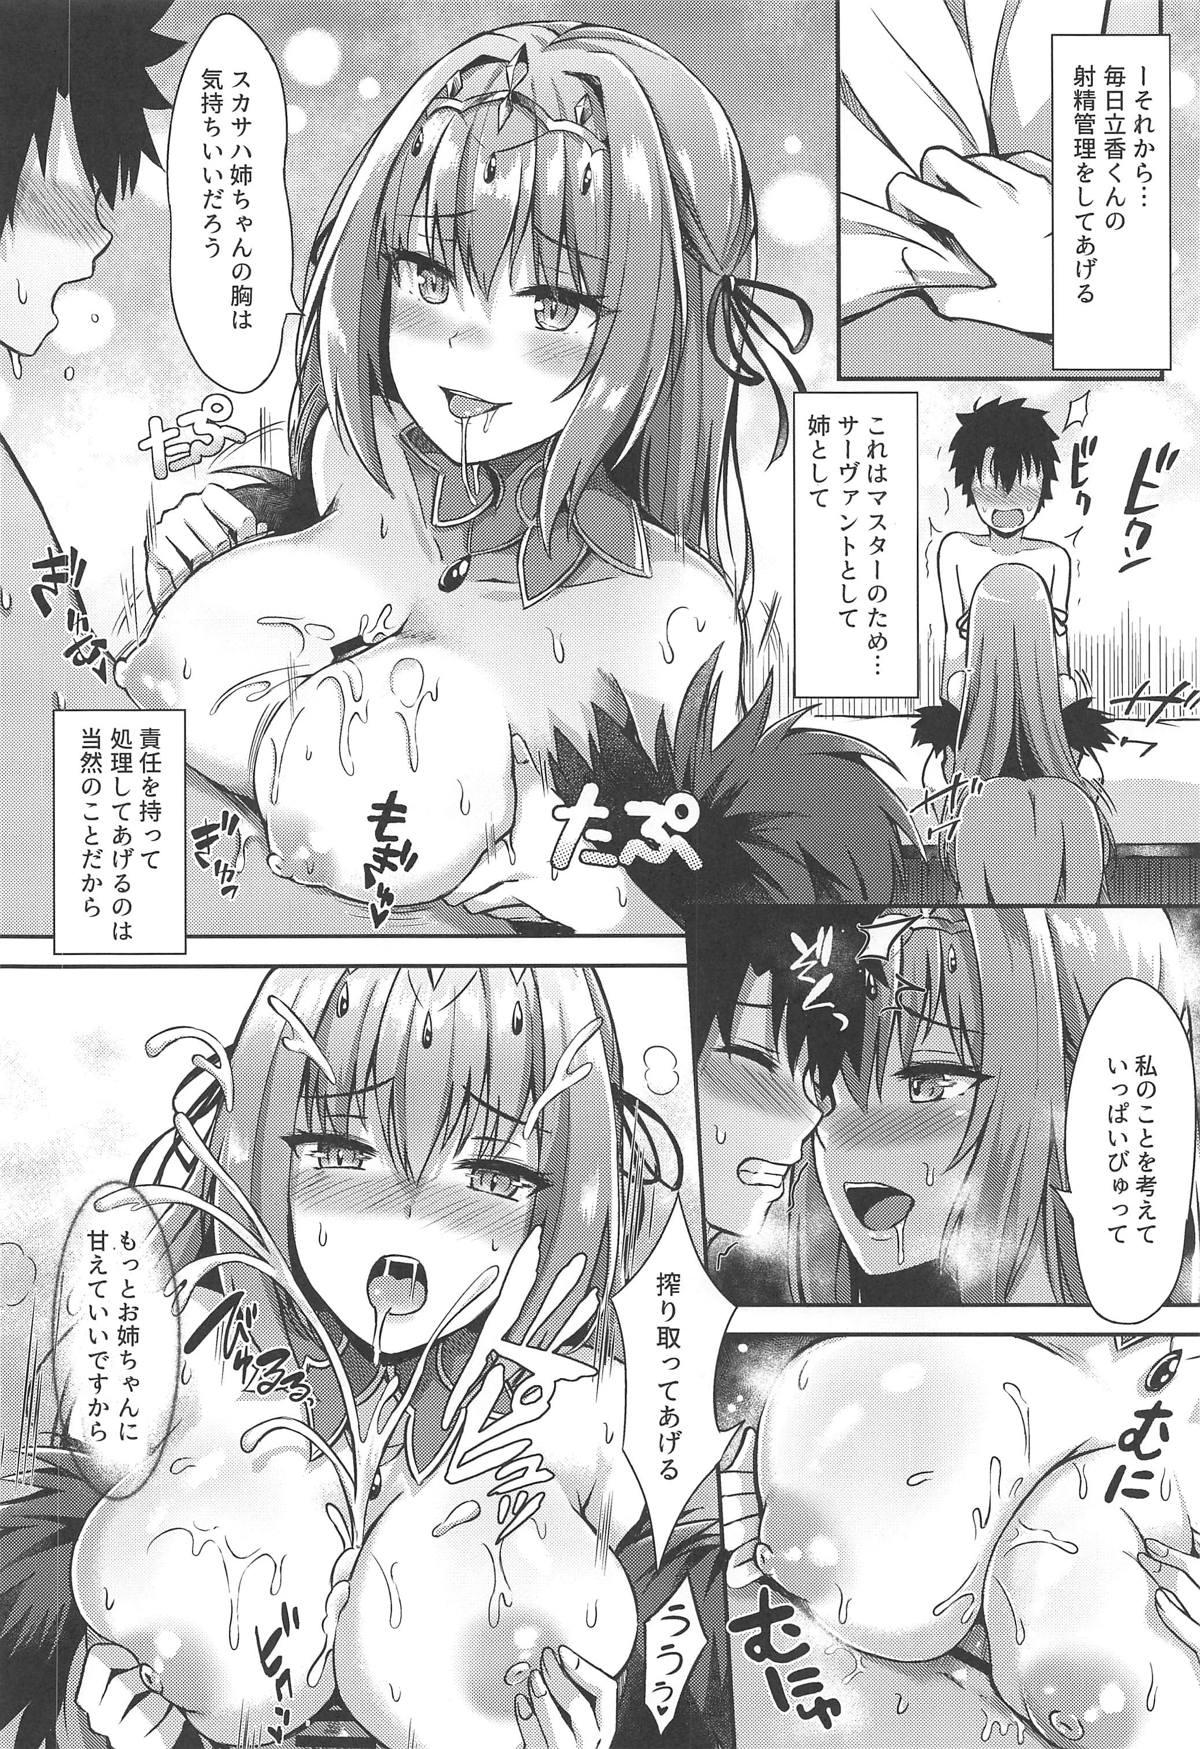 Insertion Scathach Nee-chan ga Kanri Shite Ageyou - Fate grand order Blackdick - Page 12